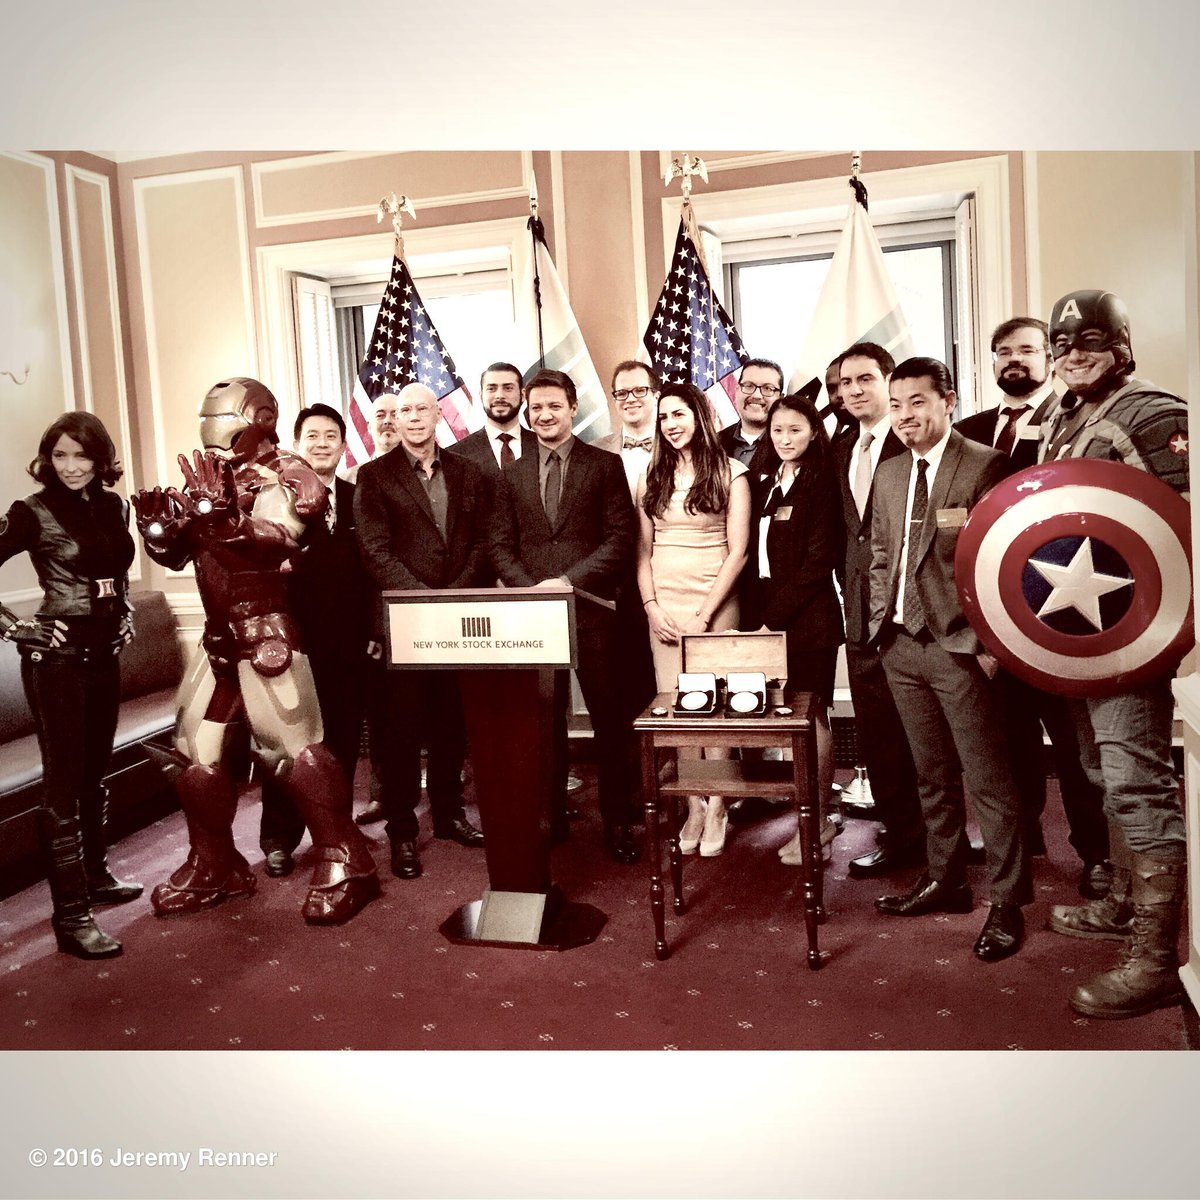 Thx @NYSE for another opening bell ring. #dingding #marvel #disney https://t.co/VpSmqSYBVQ